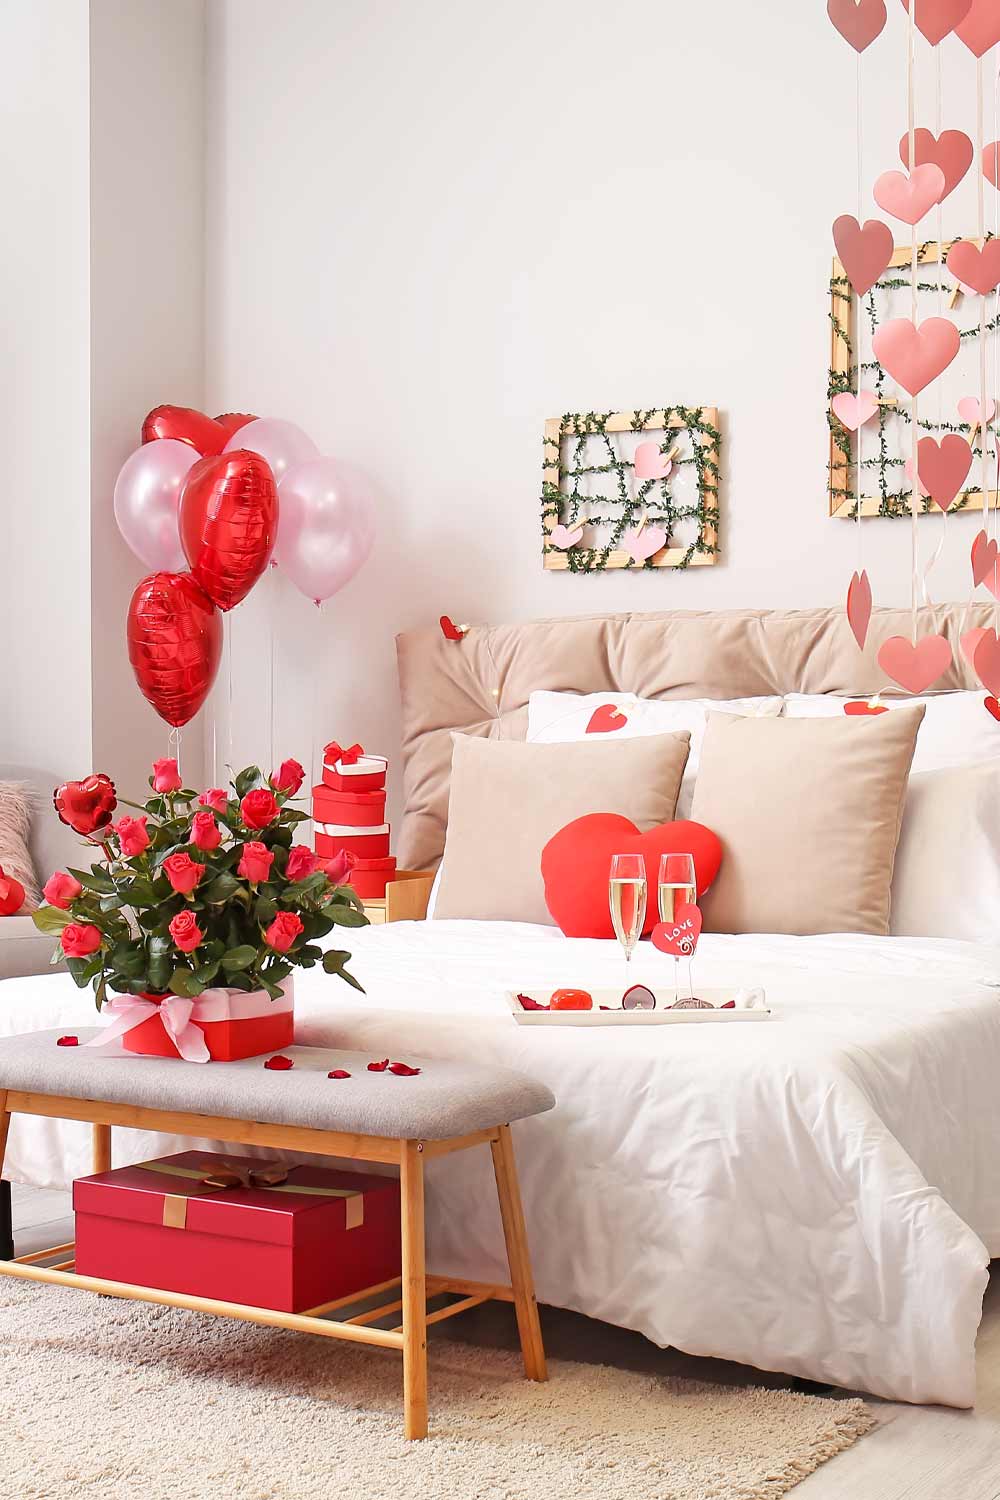 50 DIY Valentine's Day Decorations for a Cozy and Romantic Home